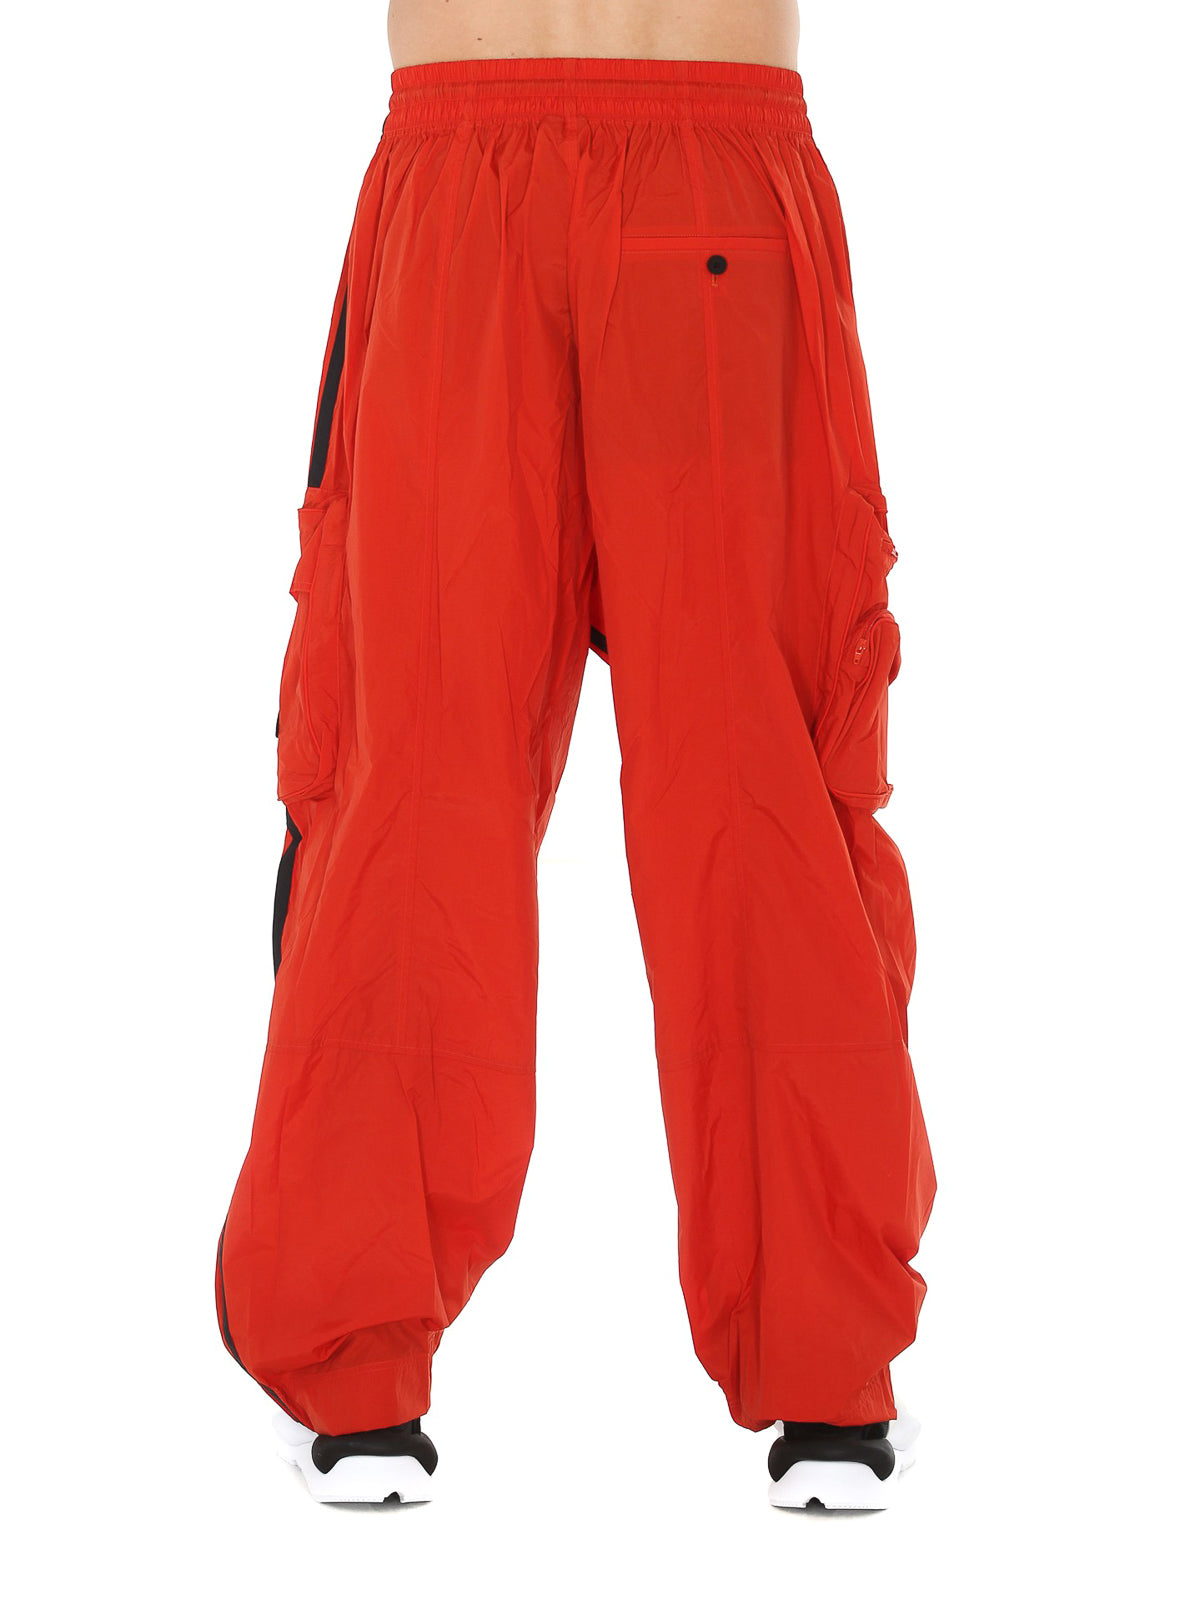 tradesports.co.uk Adidas Y-3 Men's Shell Track Pants - Red